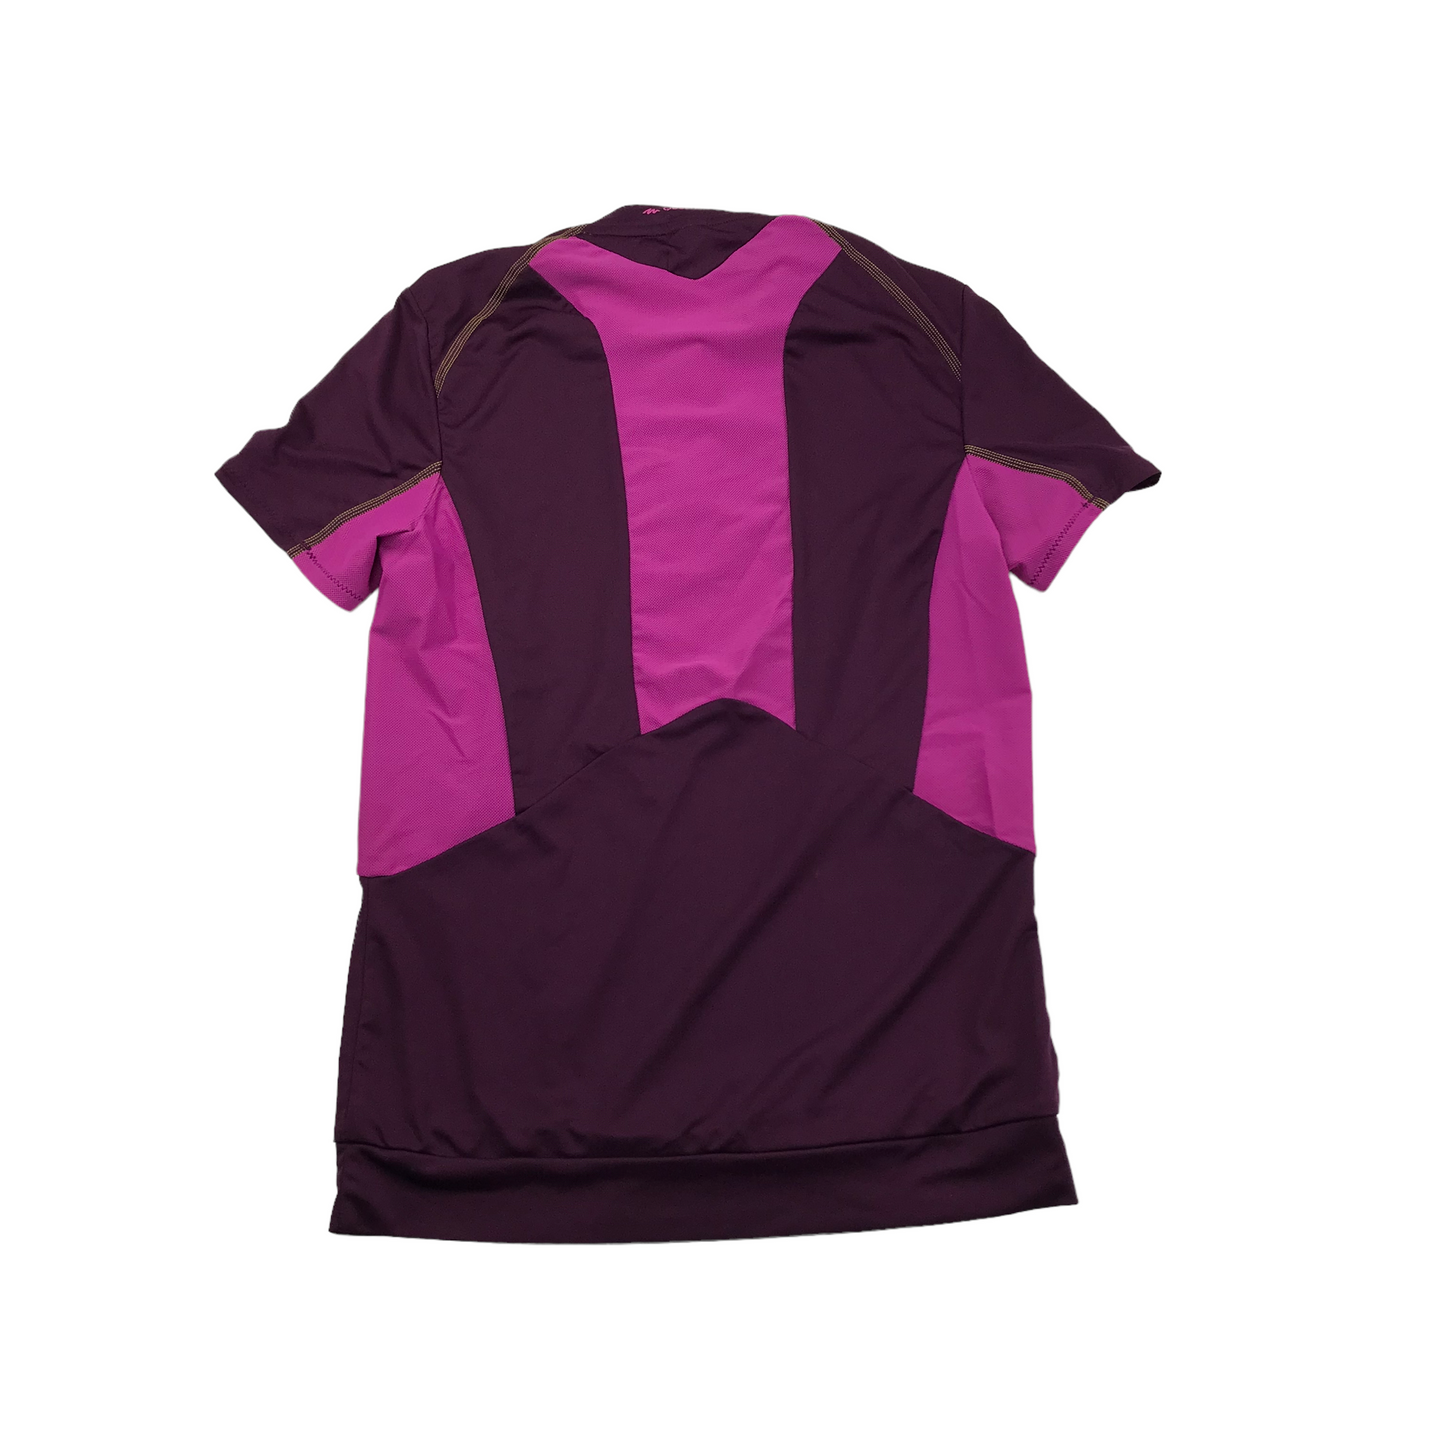 Decathlon Purple and Pink Short Sleeve Cycling Sports Top Women's Size  XS